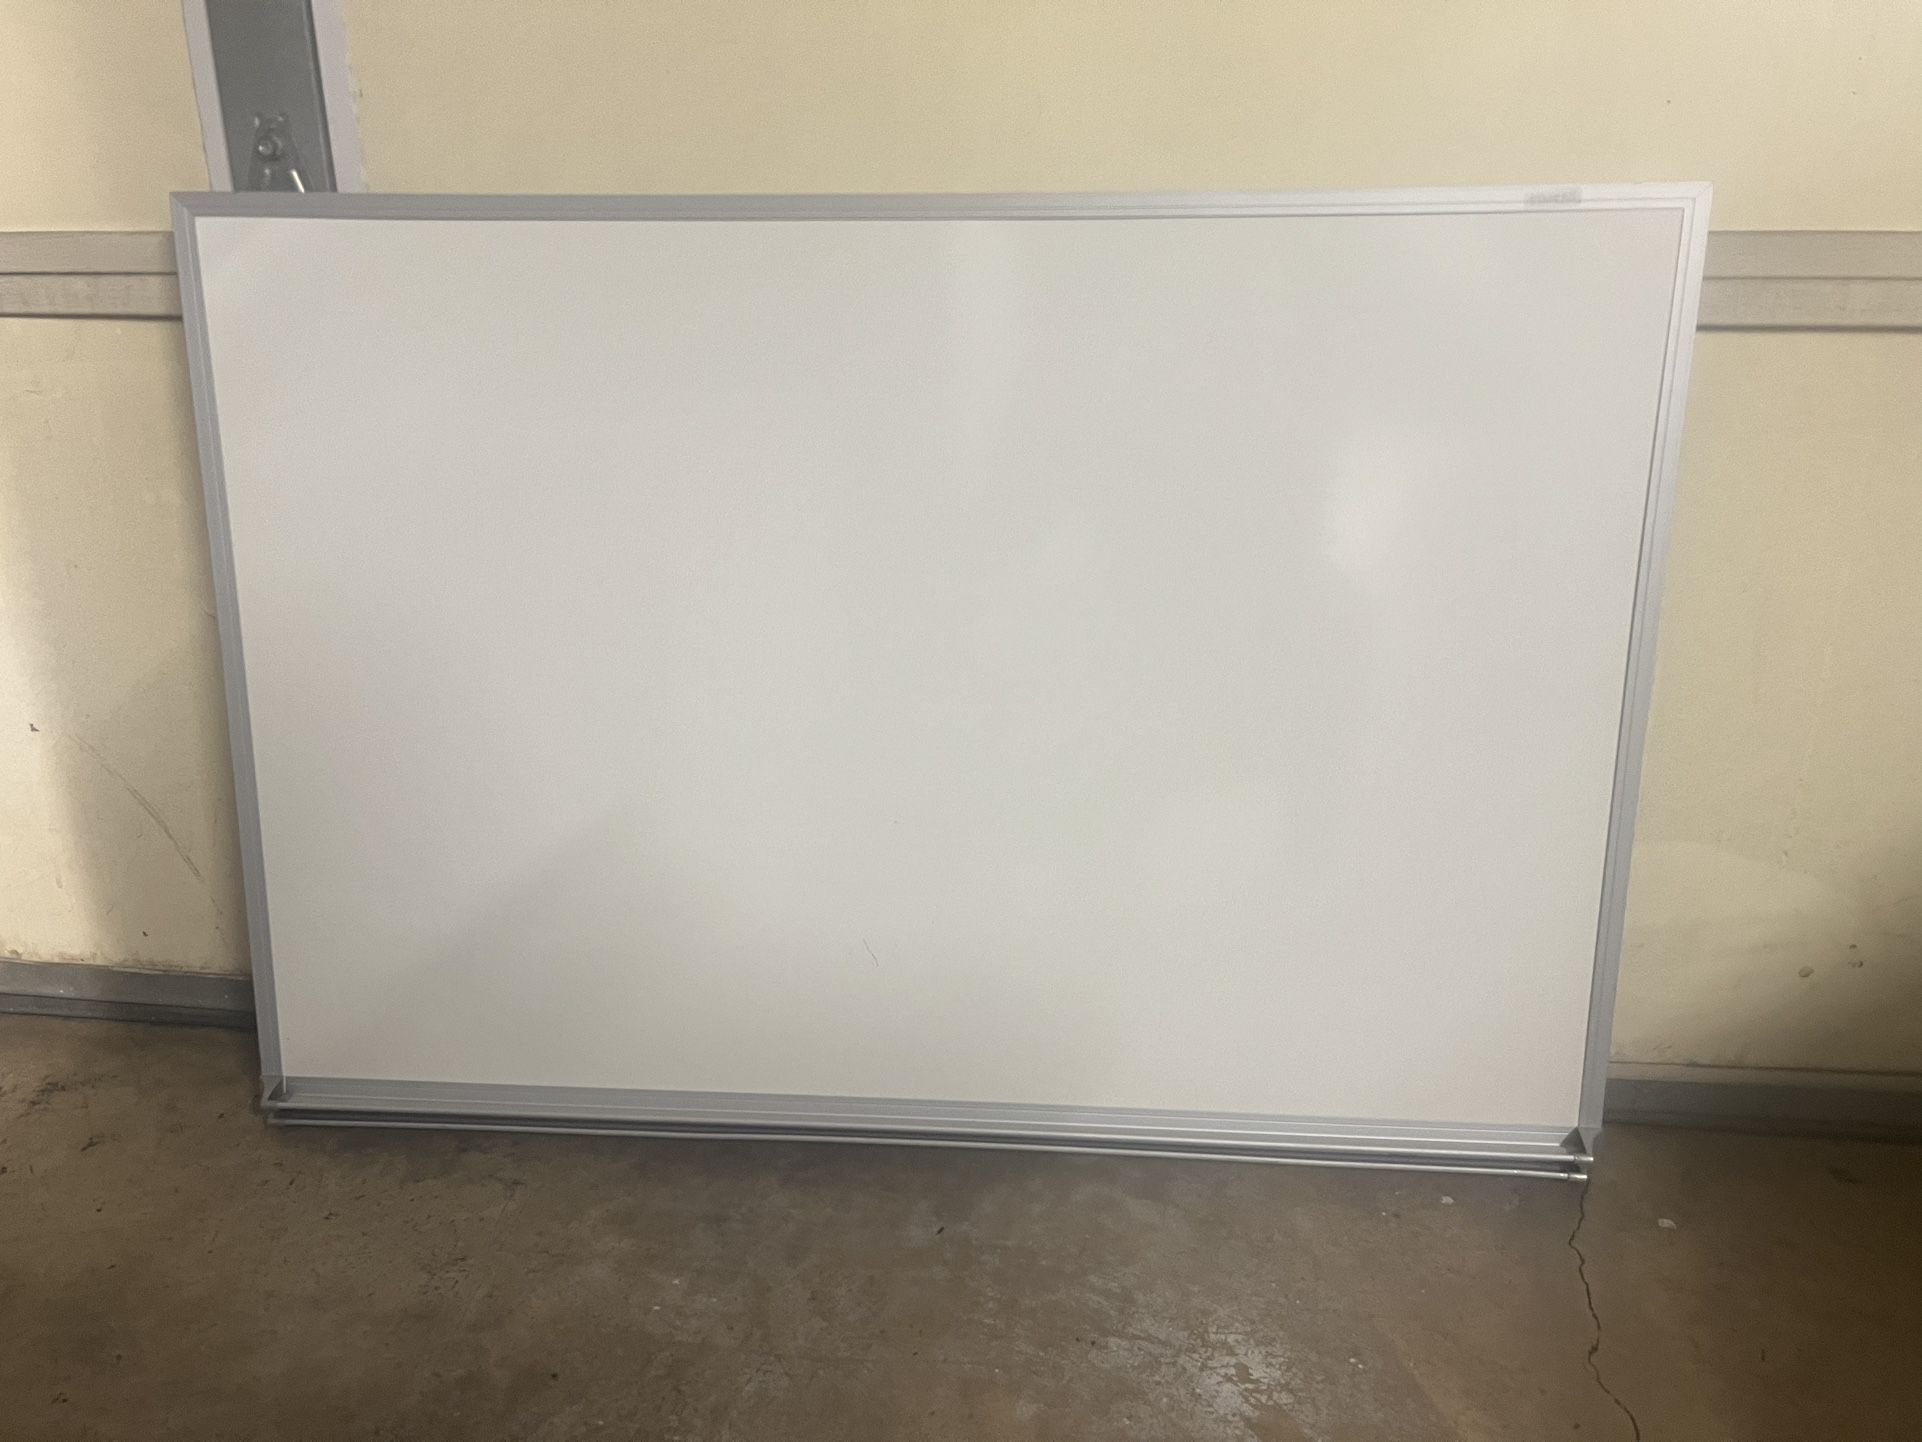 2 Whiteboards 24” High X 35” Wide 